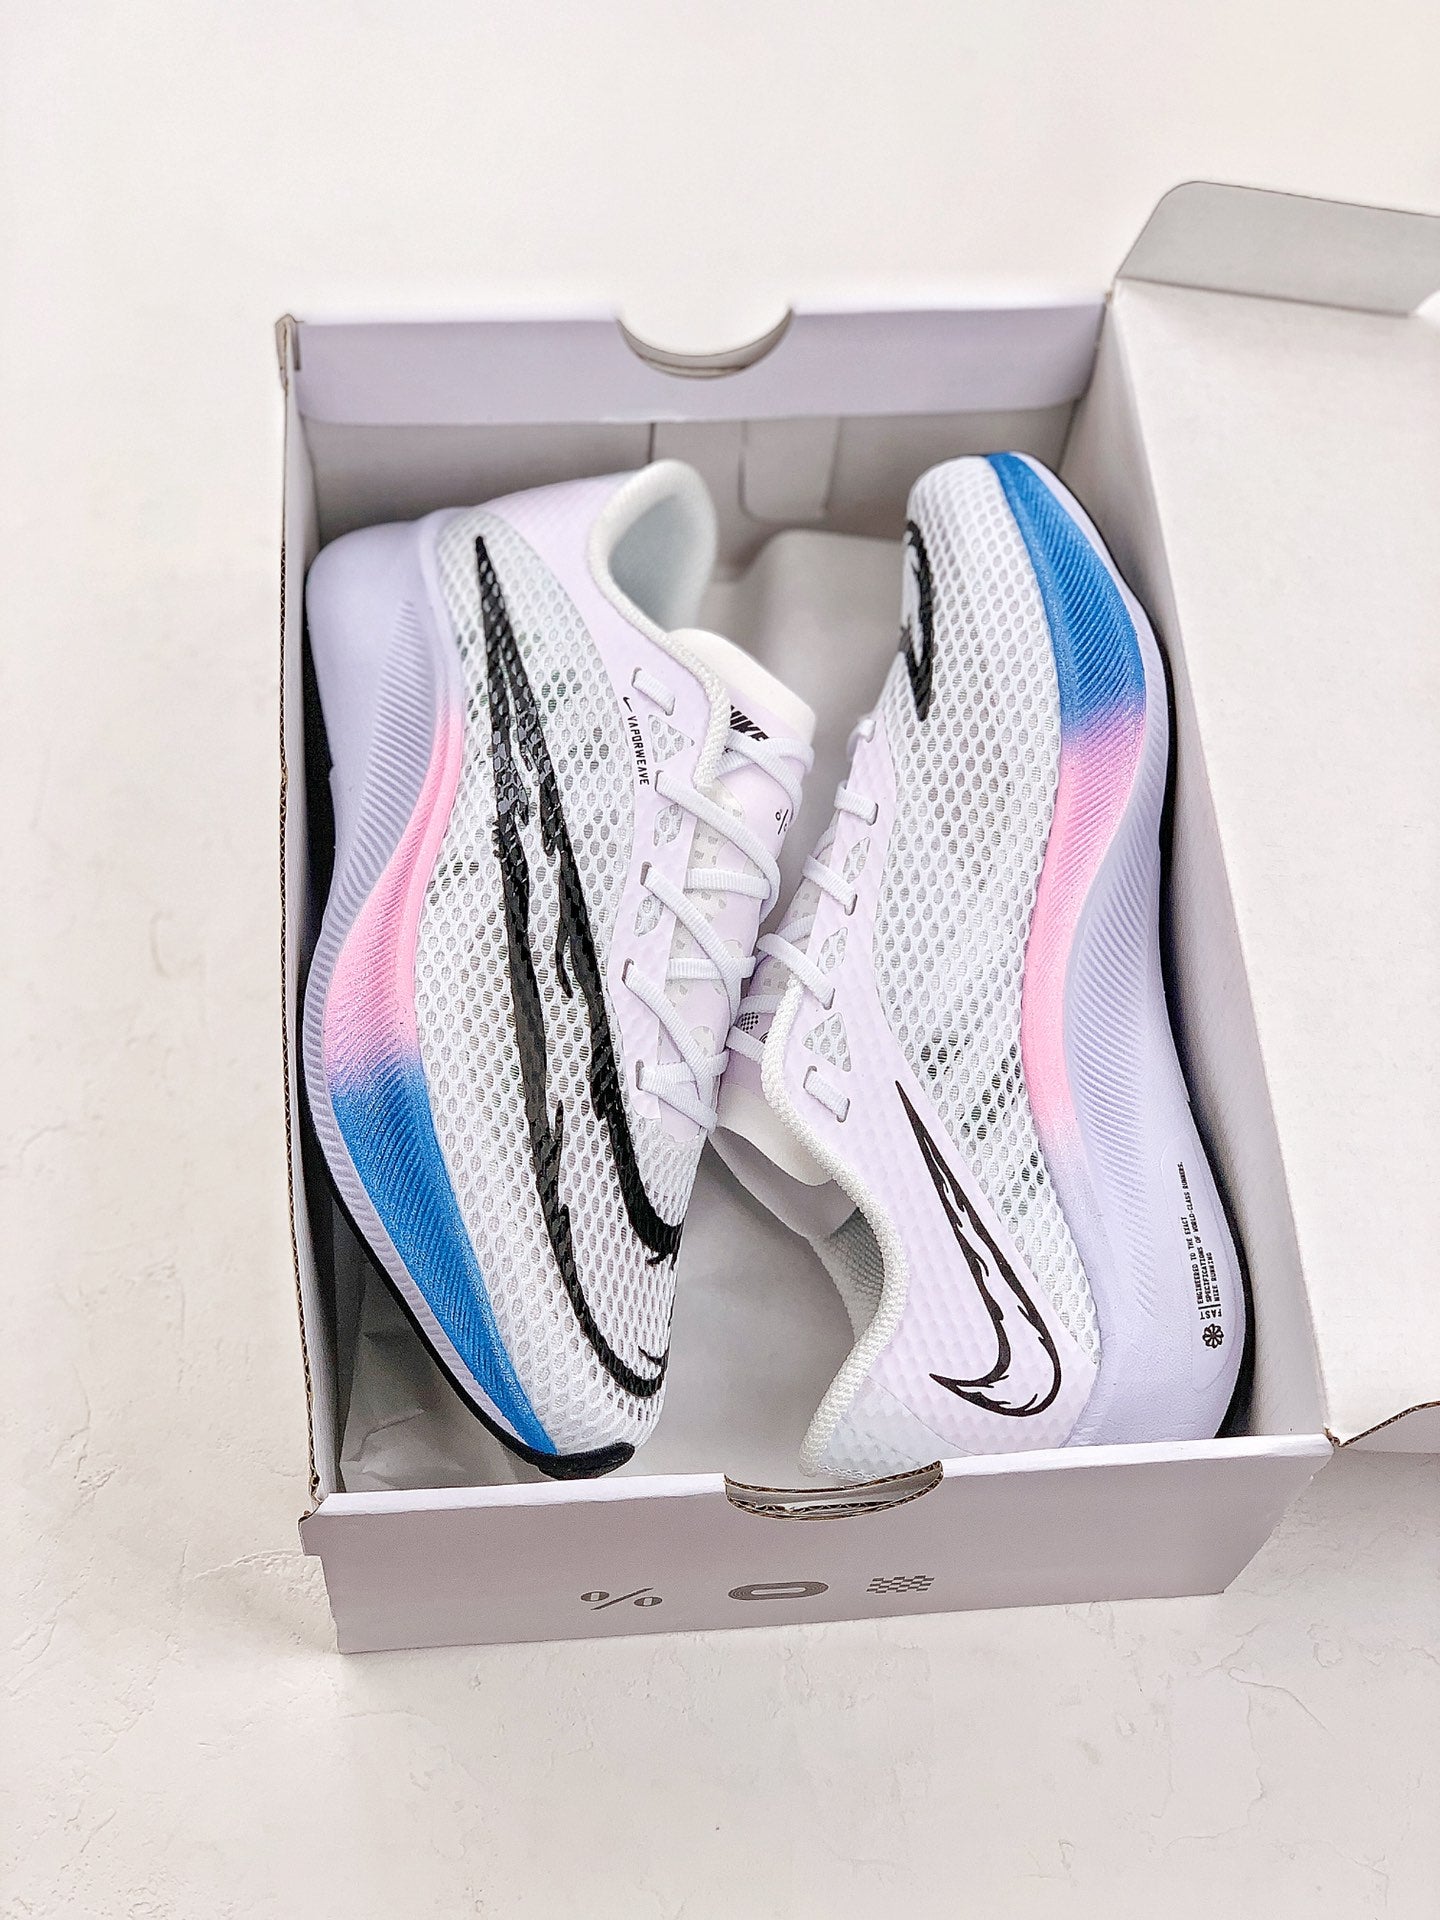 NK zoom Fly 7 White Blue Pink